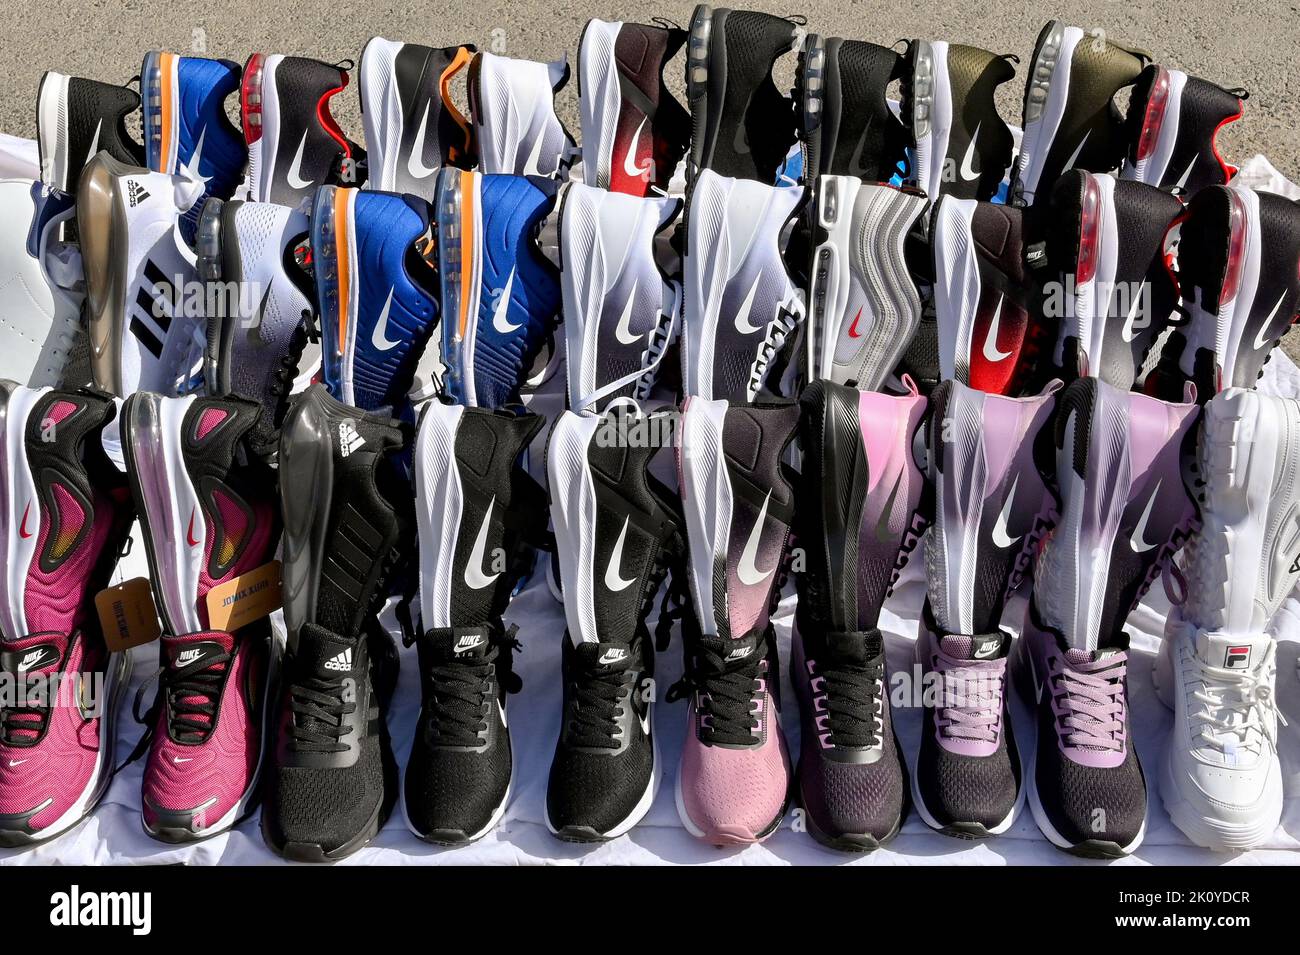 Athens, Greece - May 2022: Display of pairs of running shows with a Nike logo being sold by a street trader Stock Photo